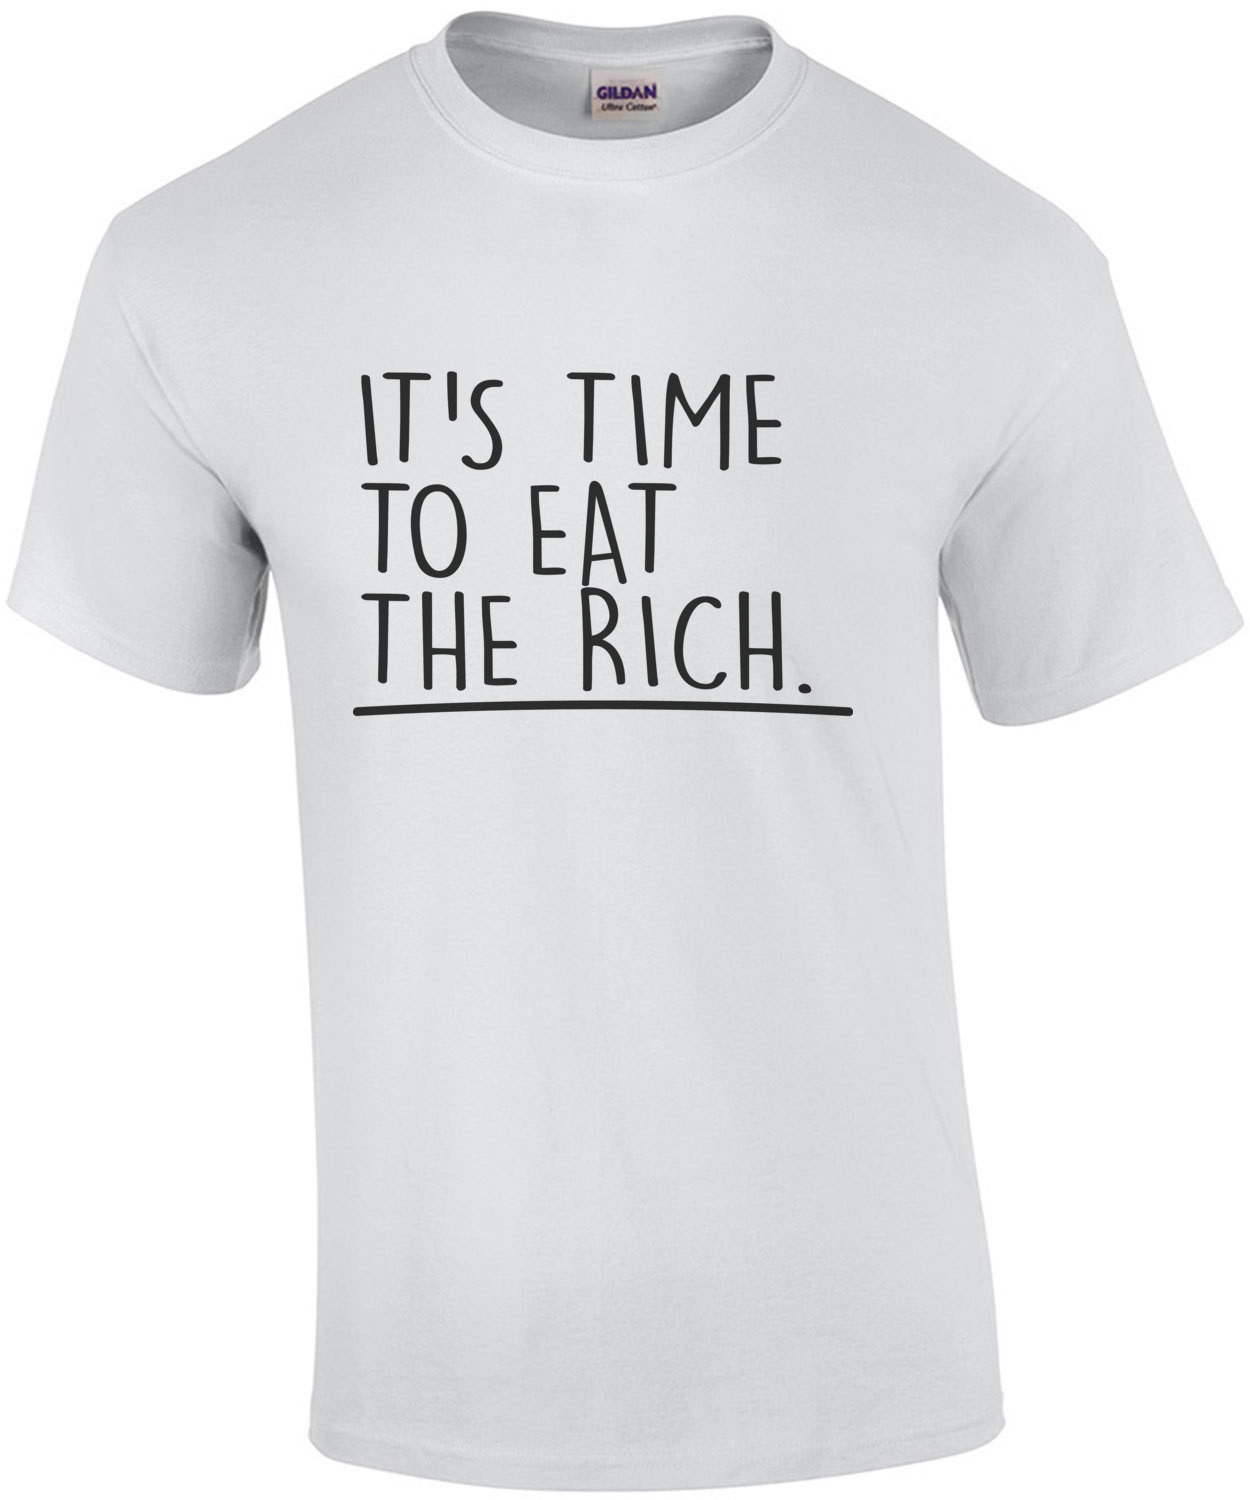 It's Time To Eat The Rich. AOC T-Shirt